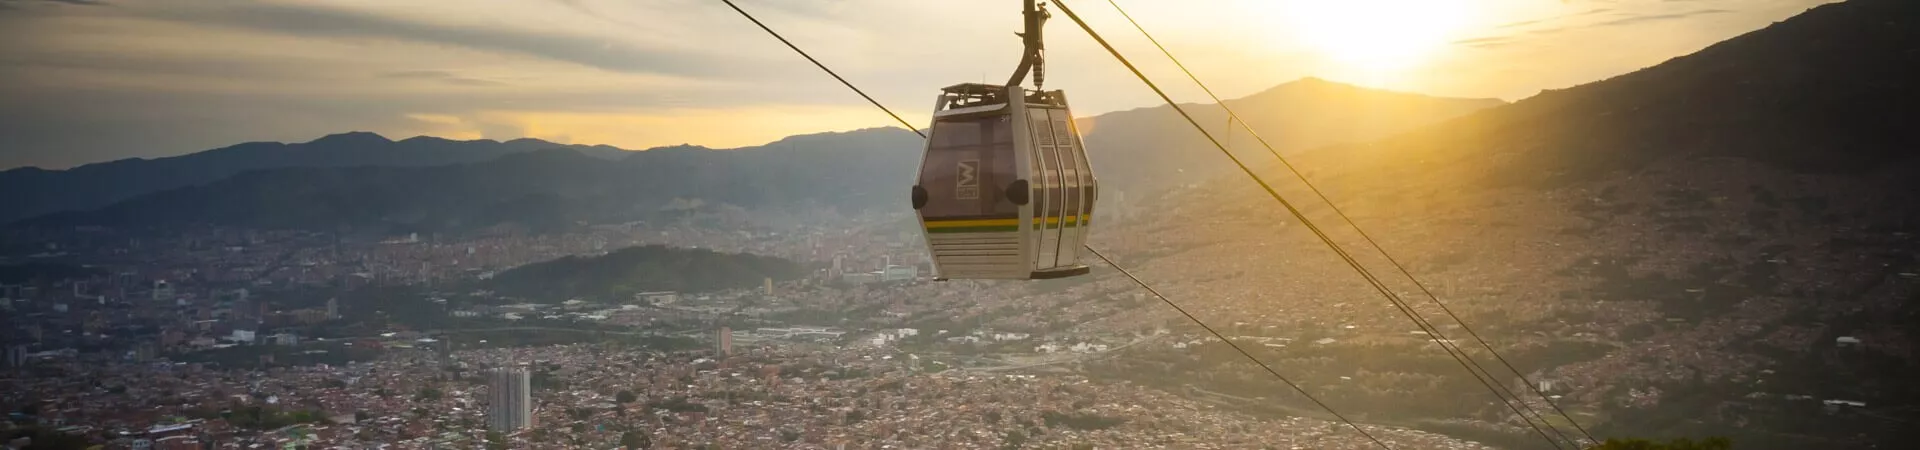 Medellin Trips and Travel Guide